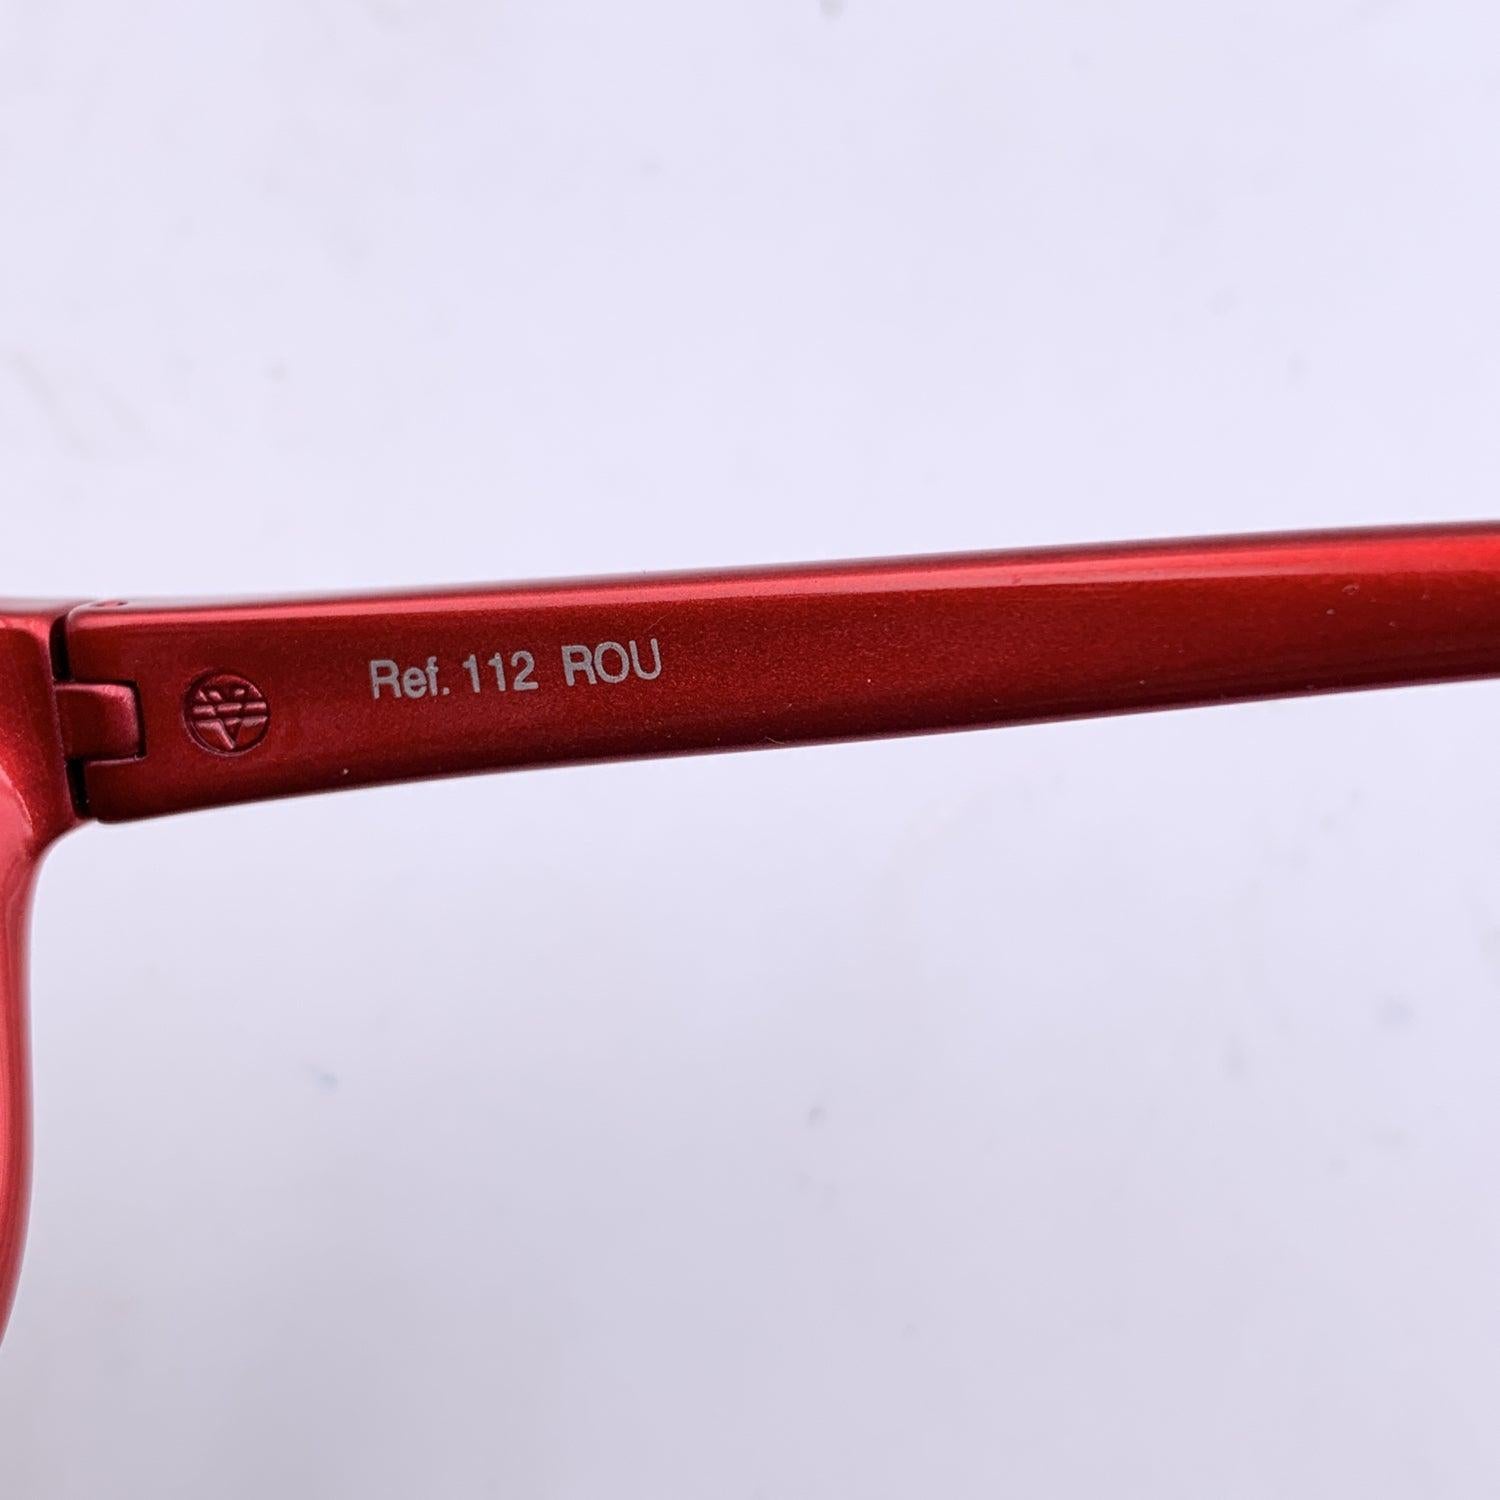 Vuarnet Legend Red 112 Sunglasses PX 2000 Lens 57/20 140 mm In Excellent Condition For Sale In Rome, Rome